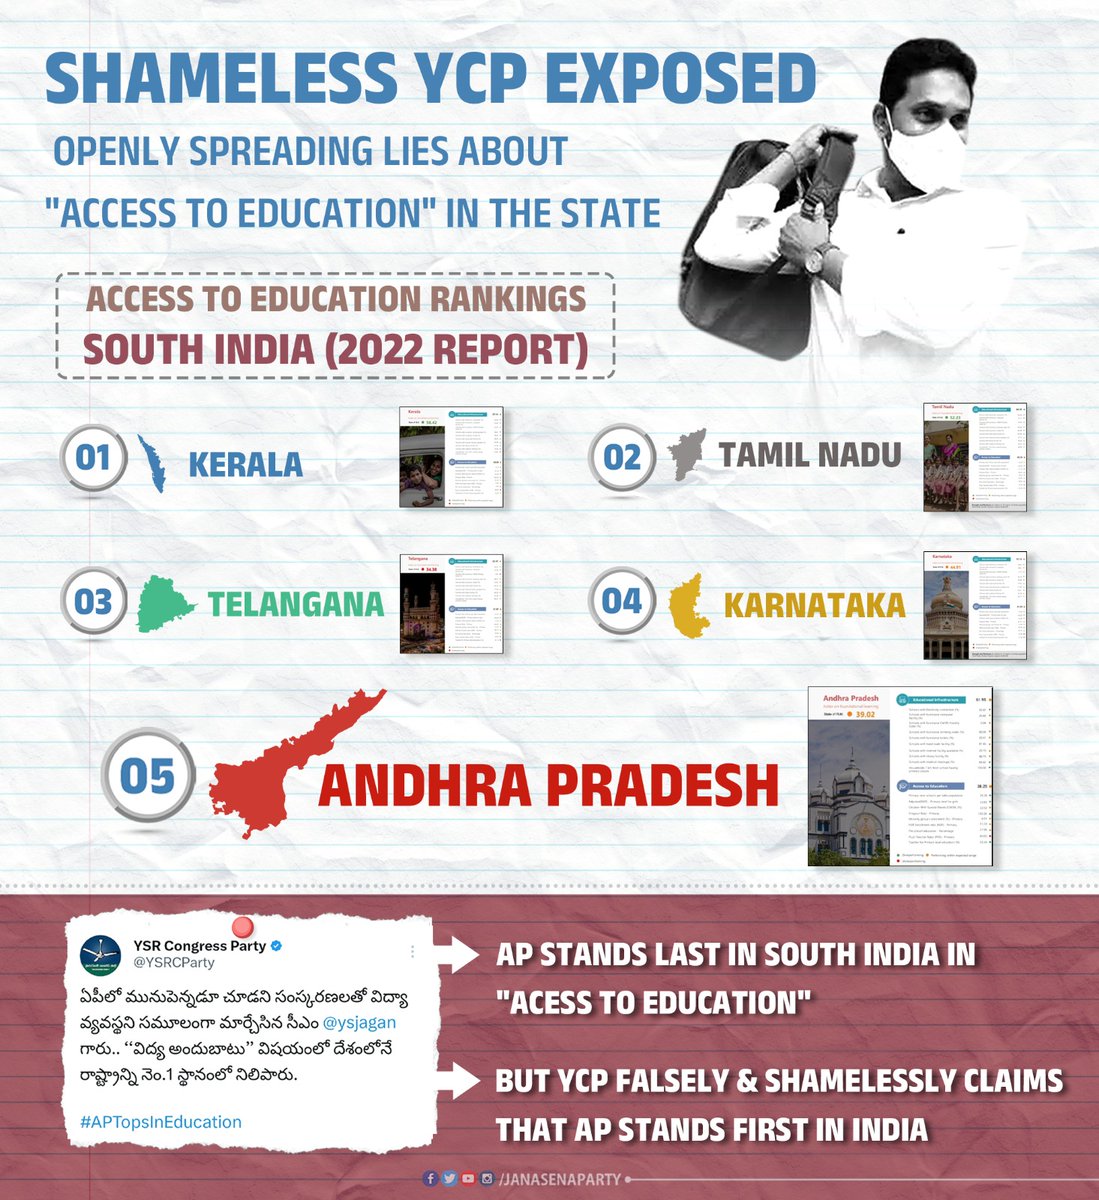 Shameless YCP Exposed! > AP stands last in South India in 'Access to Education' as per the latest 2022 report. > But @YSRCParty falsely claims that AP stands first in India. #YCPFakePropagandaExposed #YSJaganFailsEducation #WhyAPHatesJagan #JaganFailedCM #SaveAPFromYSRCP